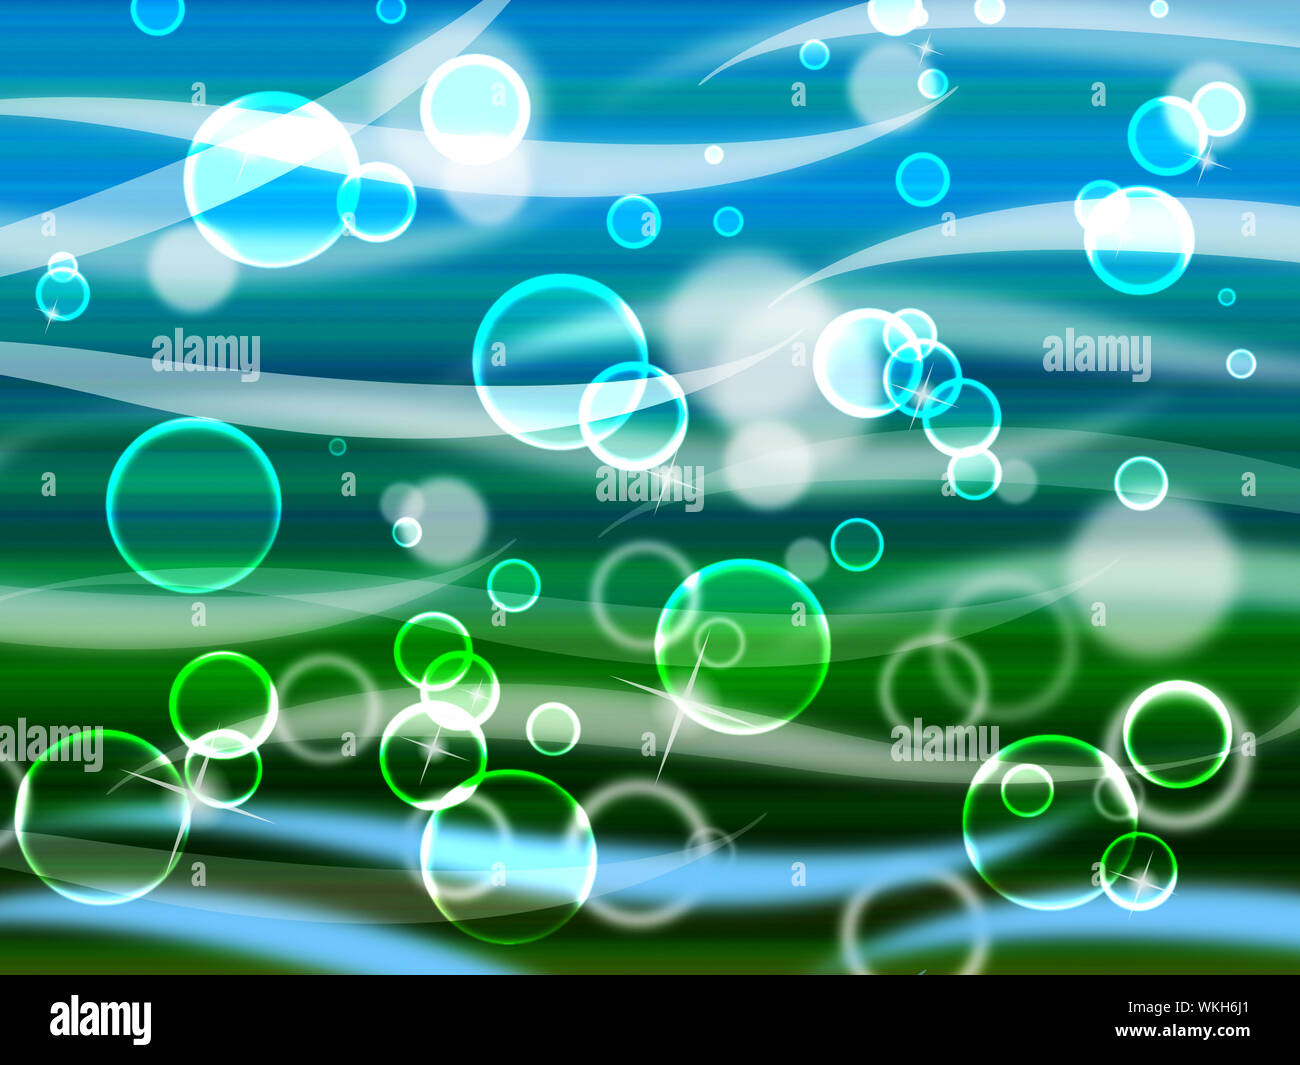 Sea Waves Background Meaning Wavy And Twinkling Bubbles Stock Photo